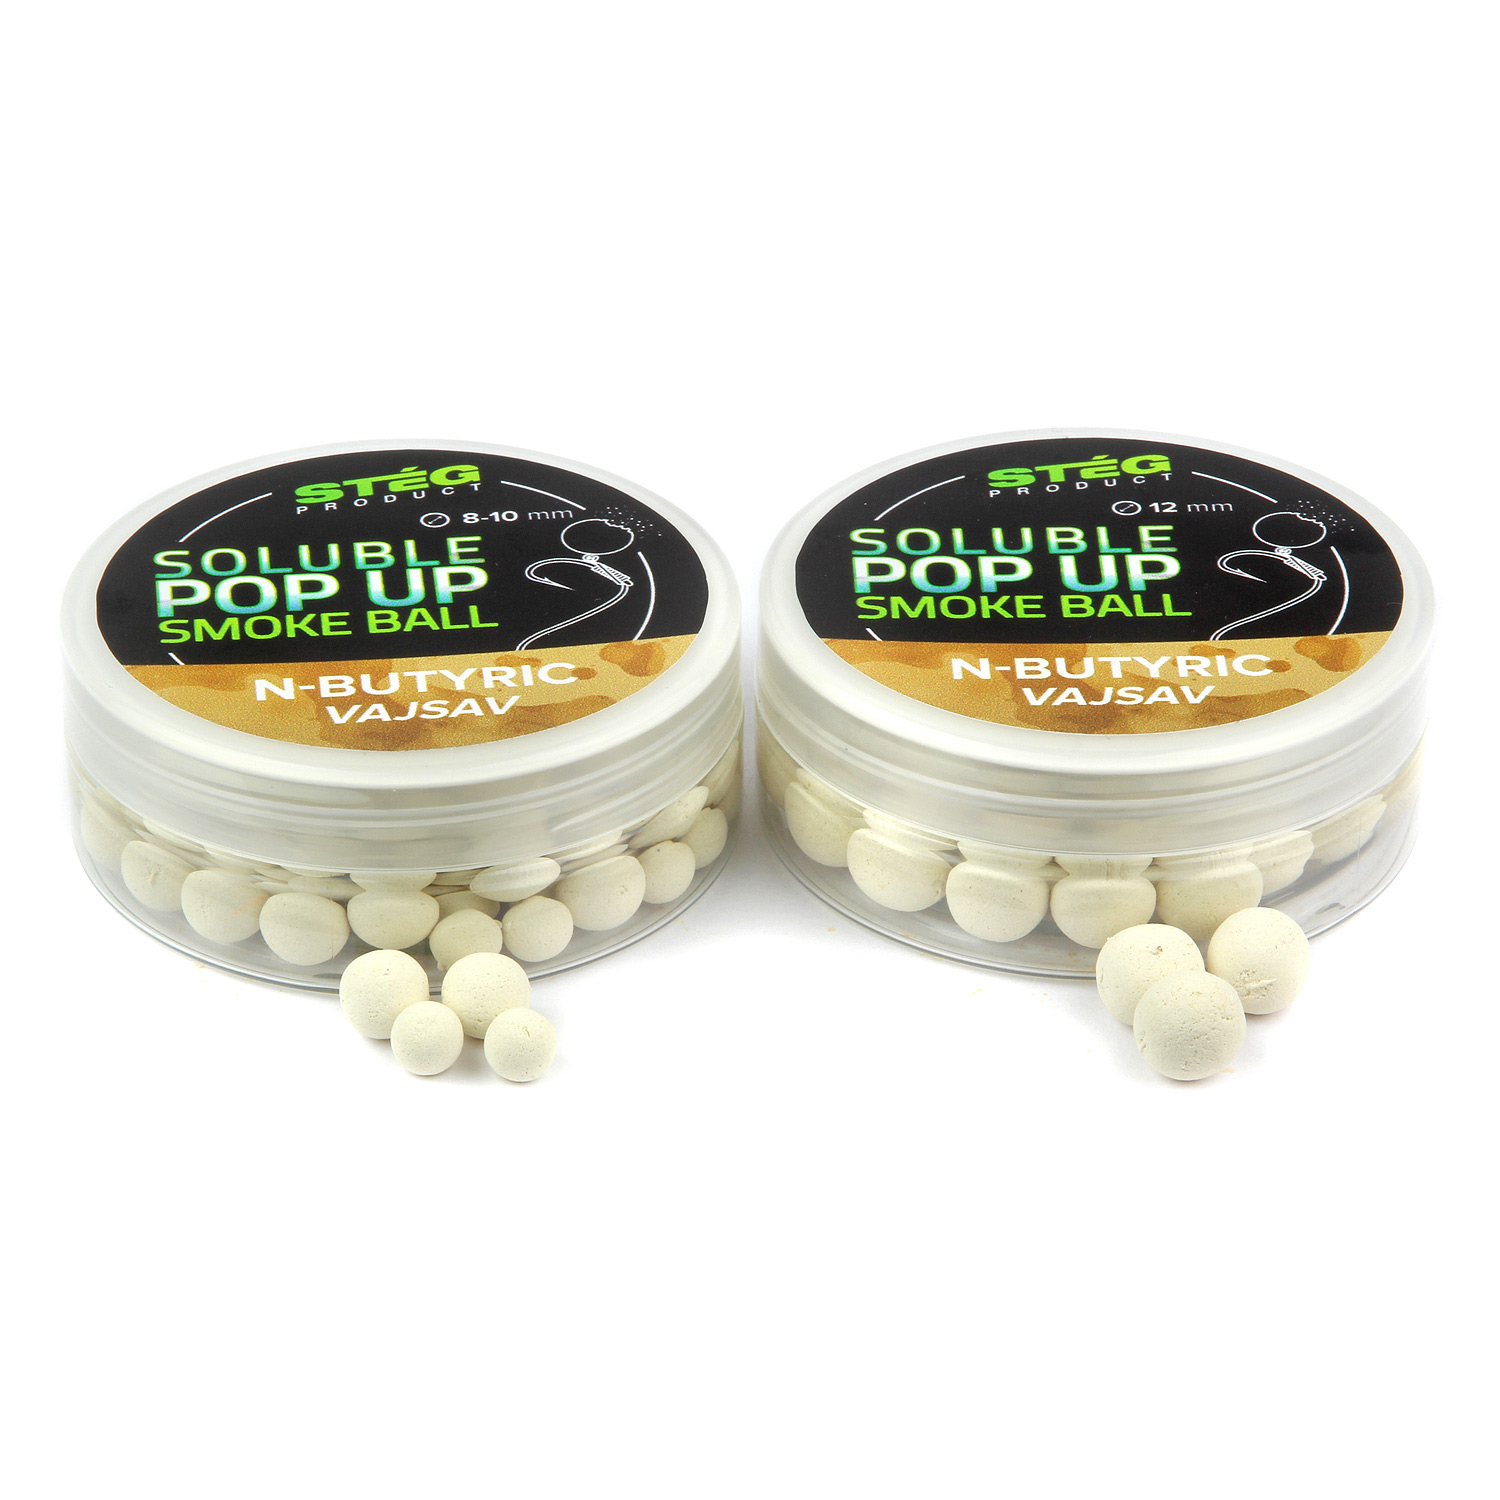 Stg Product Soluble Pop Up Smoke Ball 12mm N-Butyric 25g